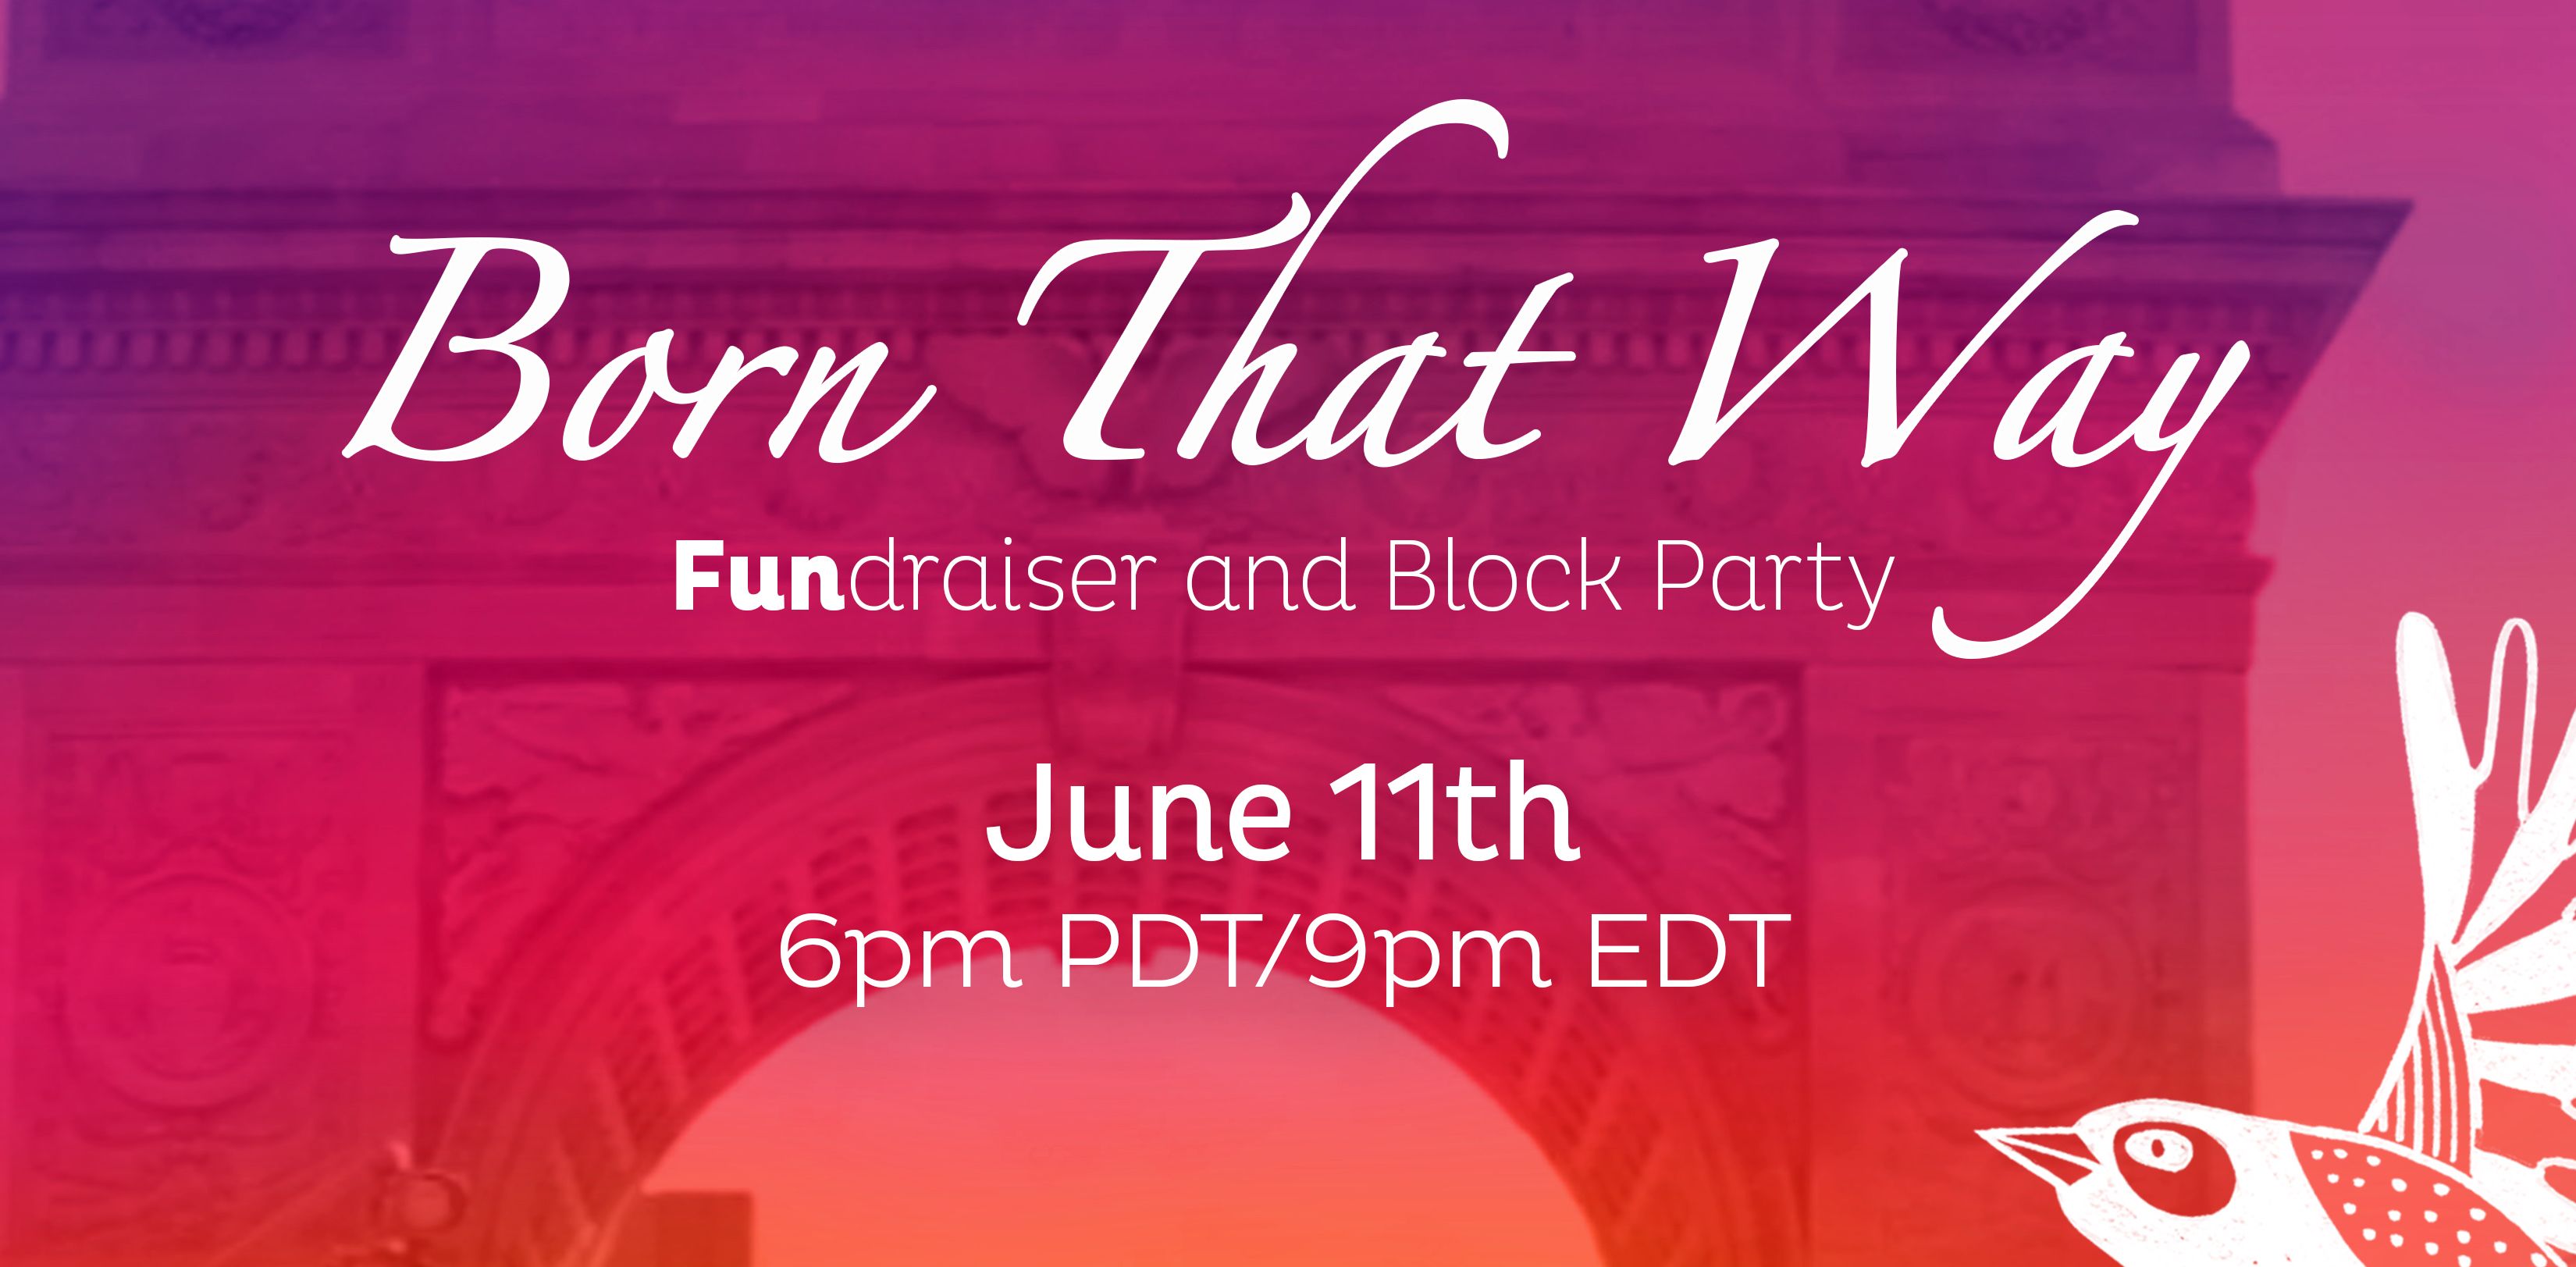 Born That Way FUNdraiser and Block Party Silent Auction event logo